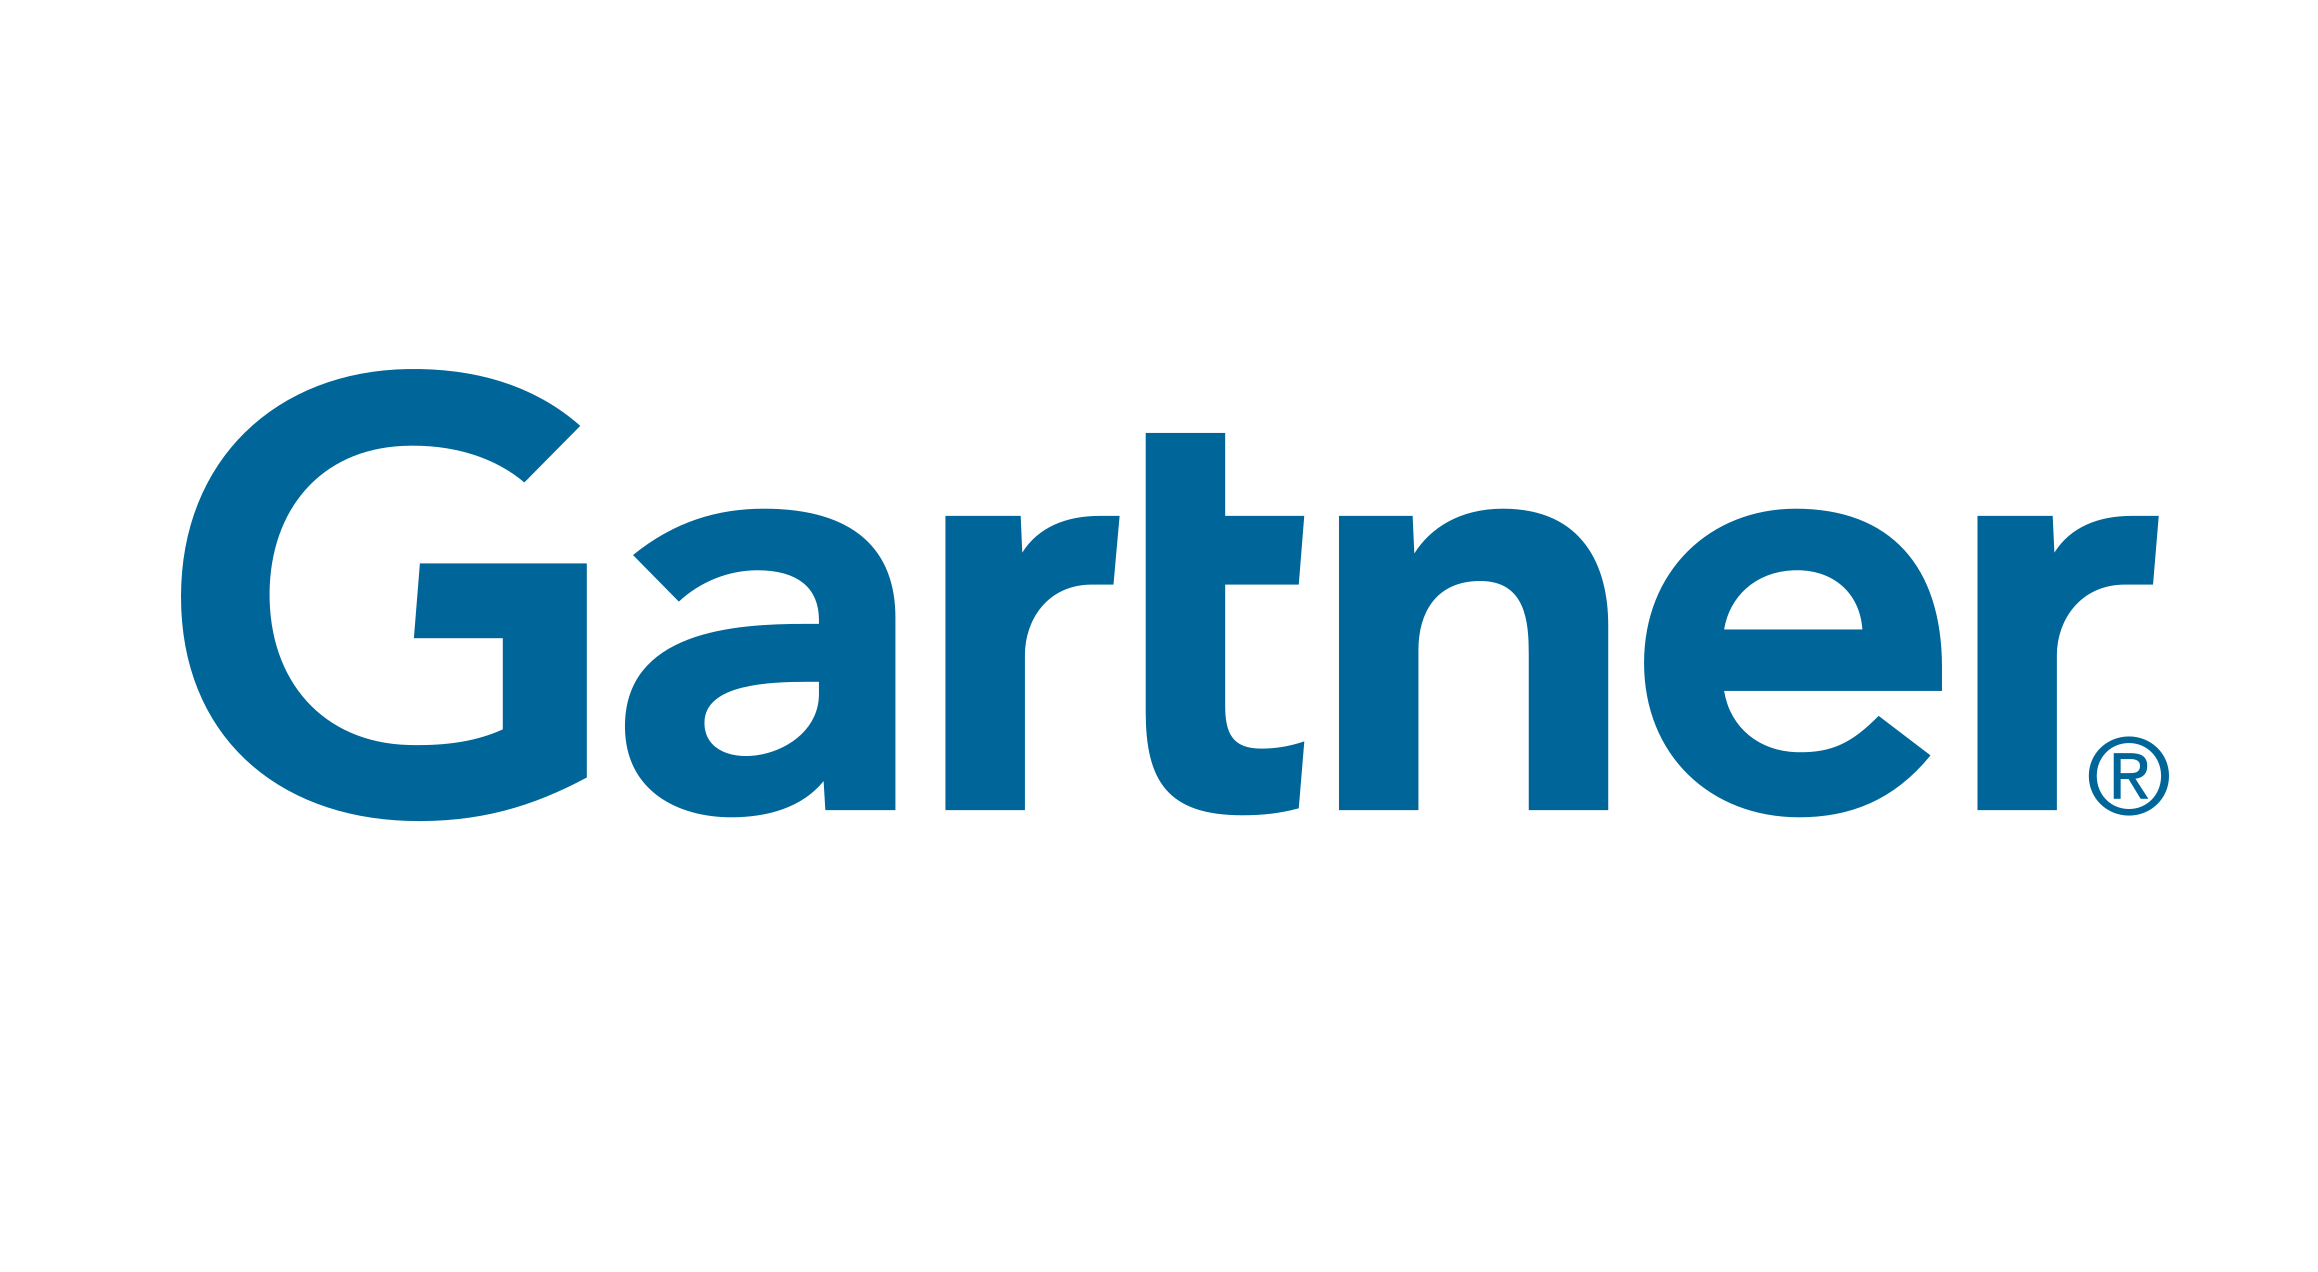 N2N Services Recognized in Gartner’s 2016 Hype Cycle for Education